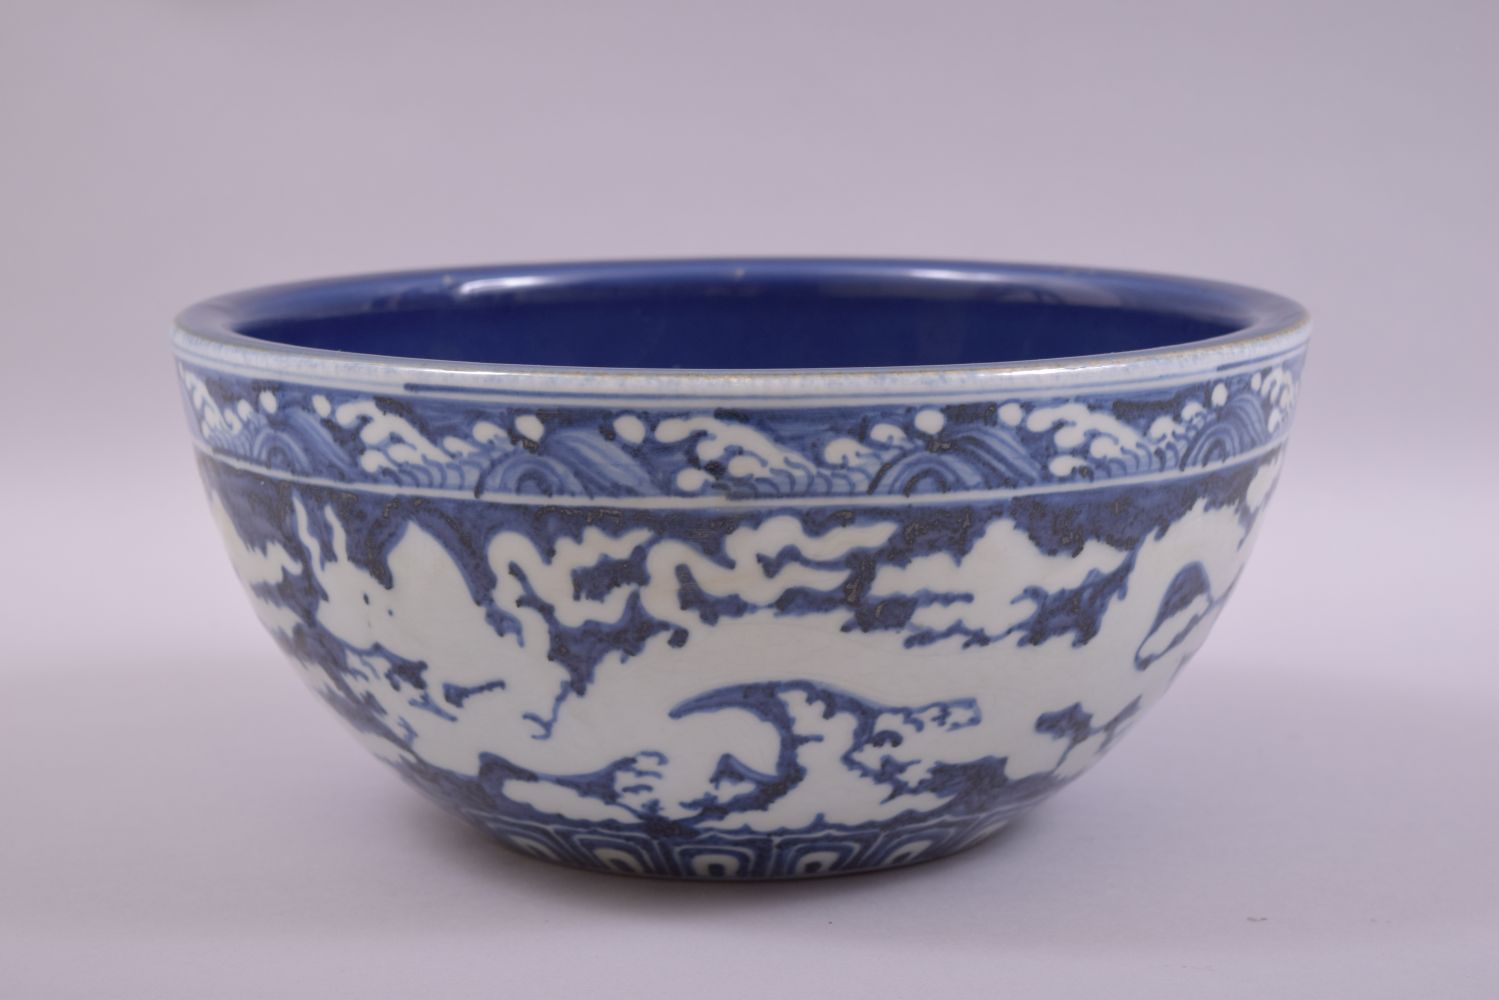 A LARGE CHINESE SACRIFICIAL BLUE GLAZE DRAGON BOWL, the exterior with white dragons and clouds - Image 2 of 7